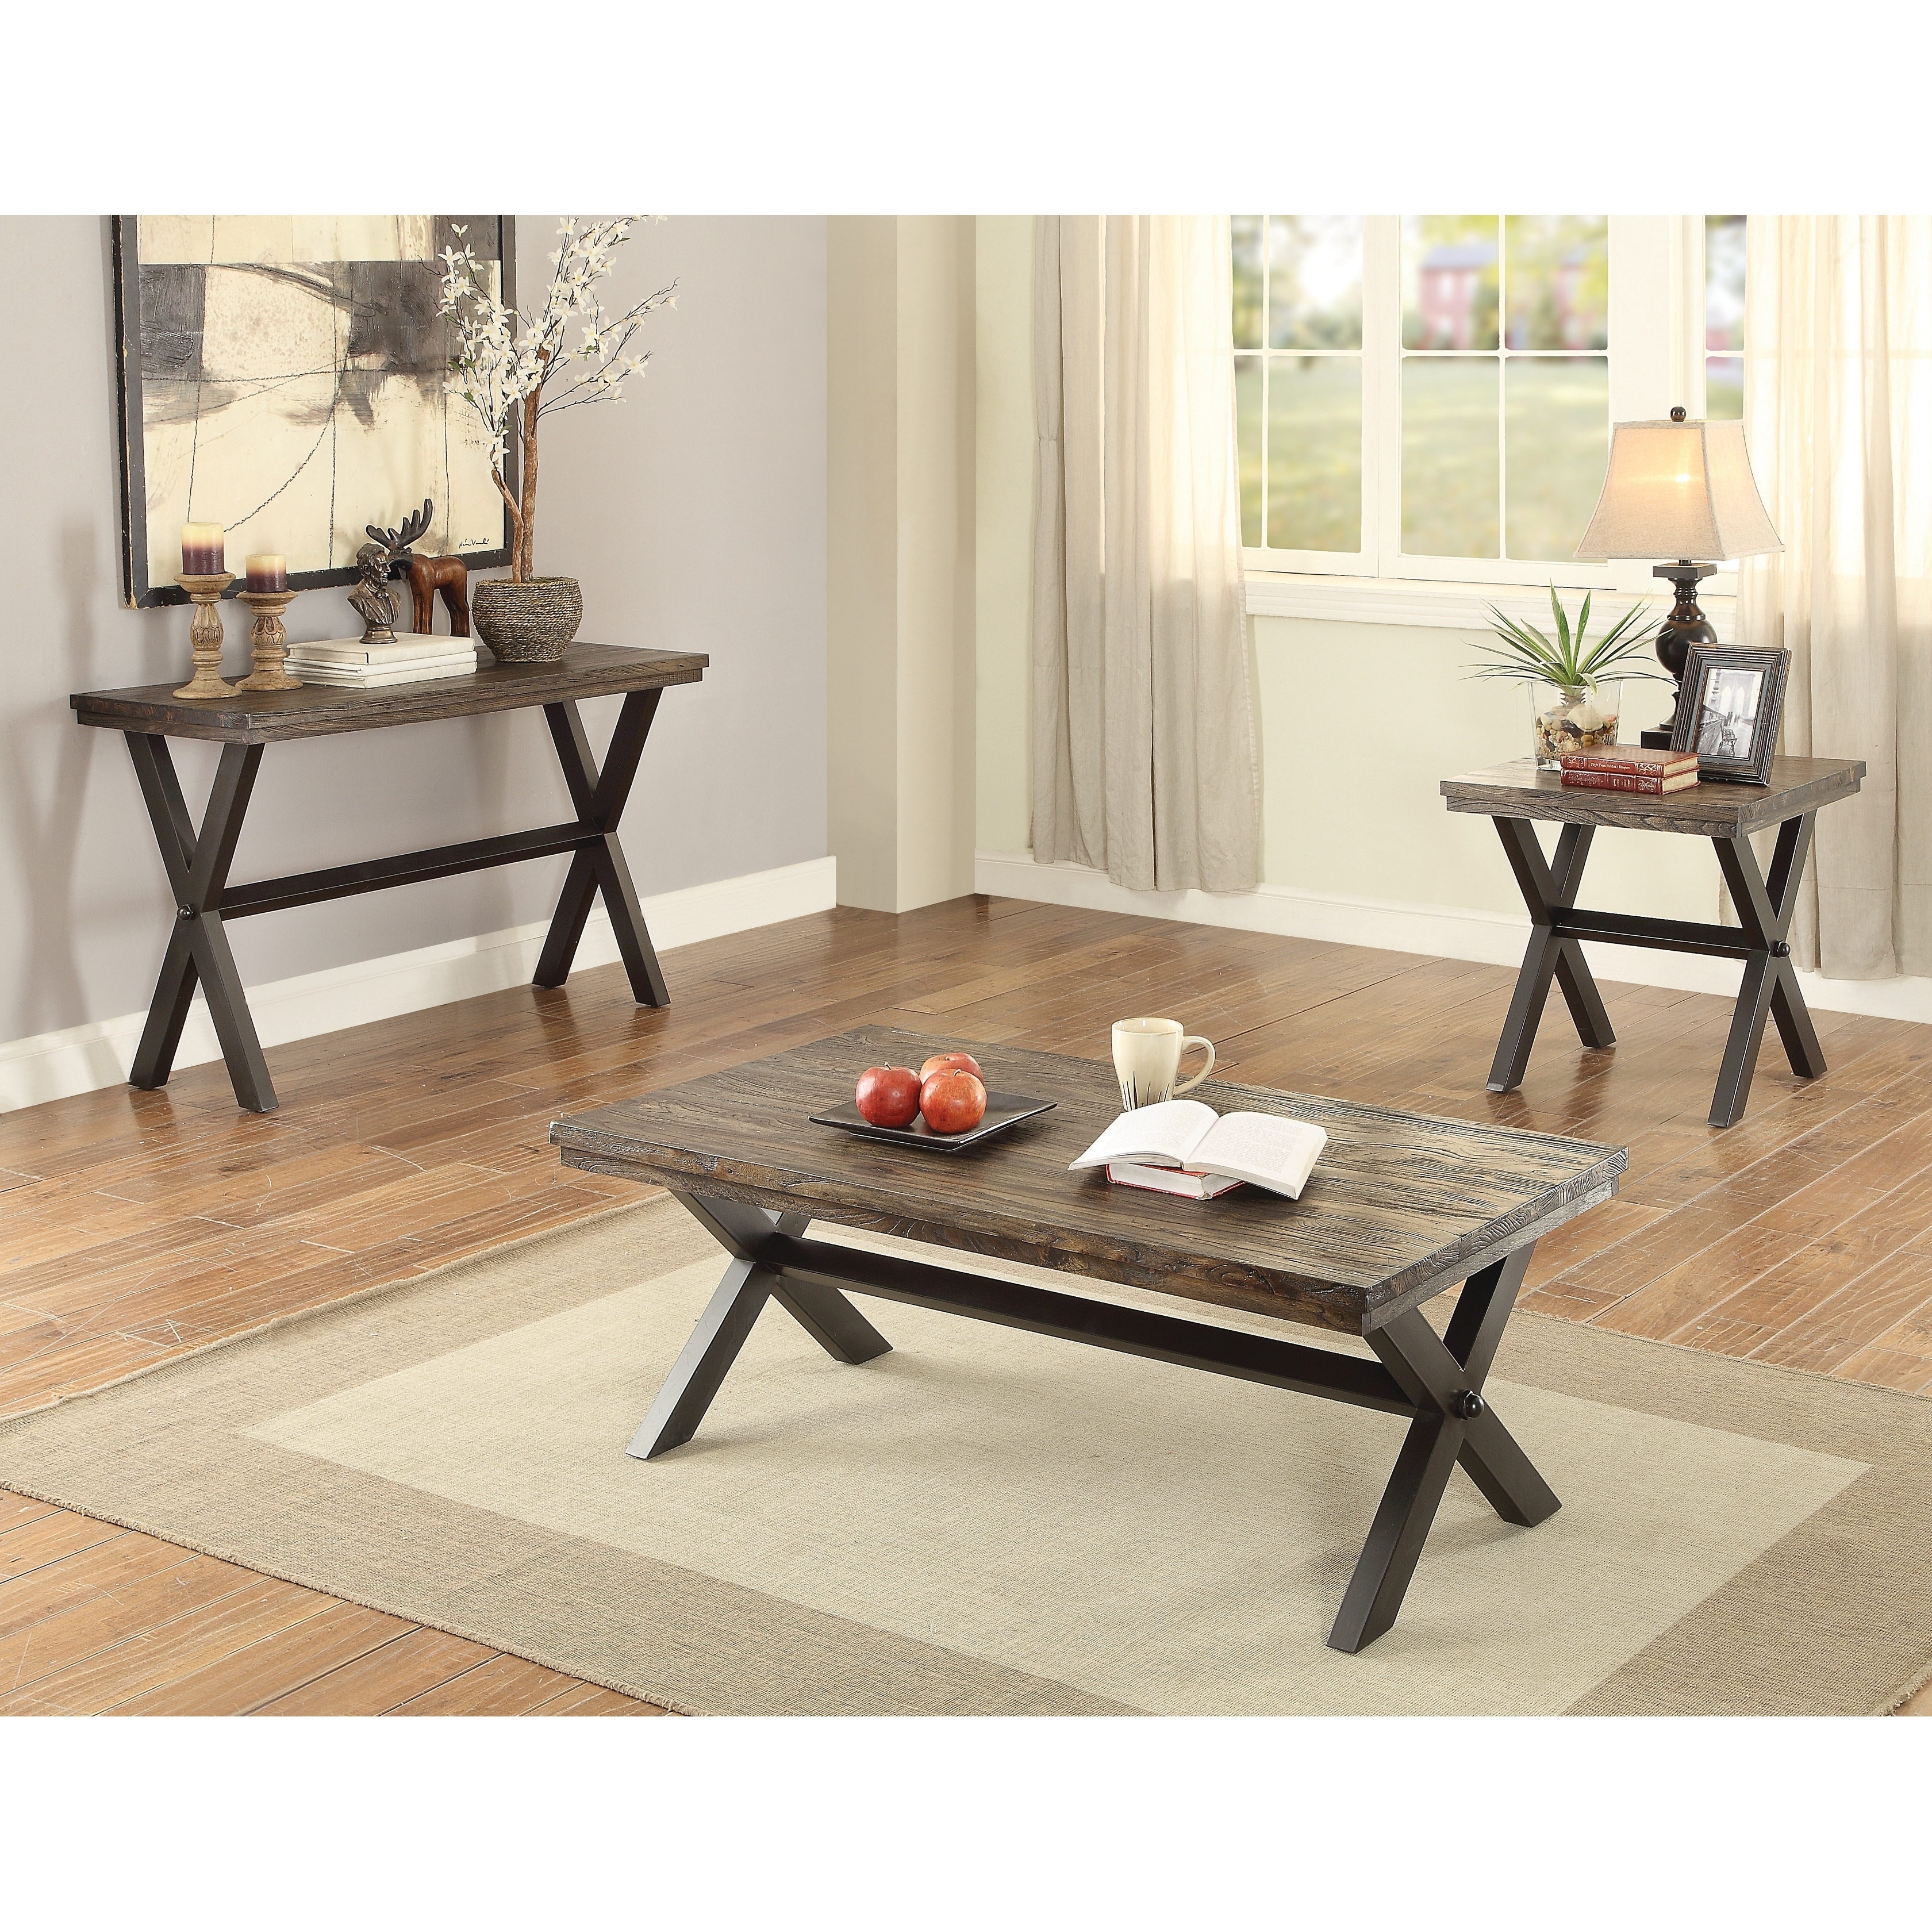 romilly rustic dark brown end table free shipping today tables office accent ethan allen furniture catalog magnolia farmers market diy steel pipe desk big lots open dining room